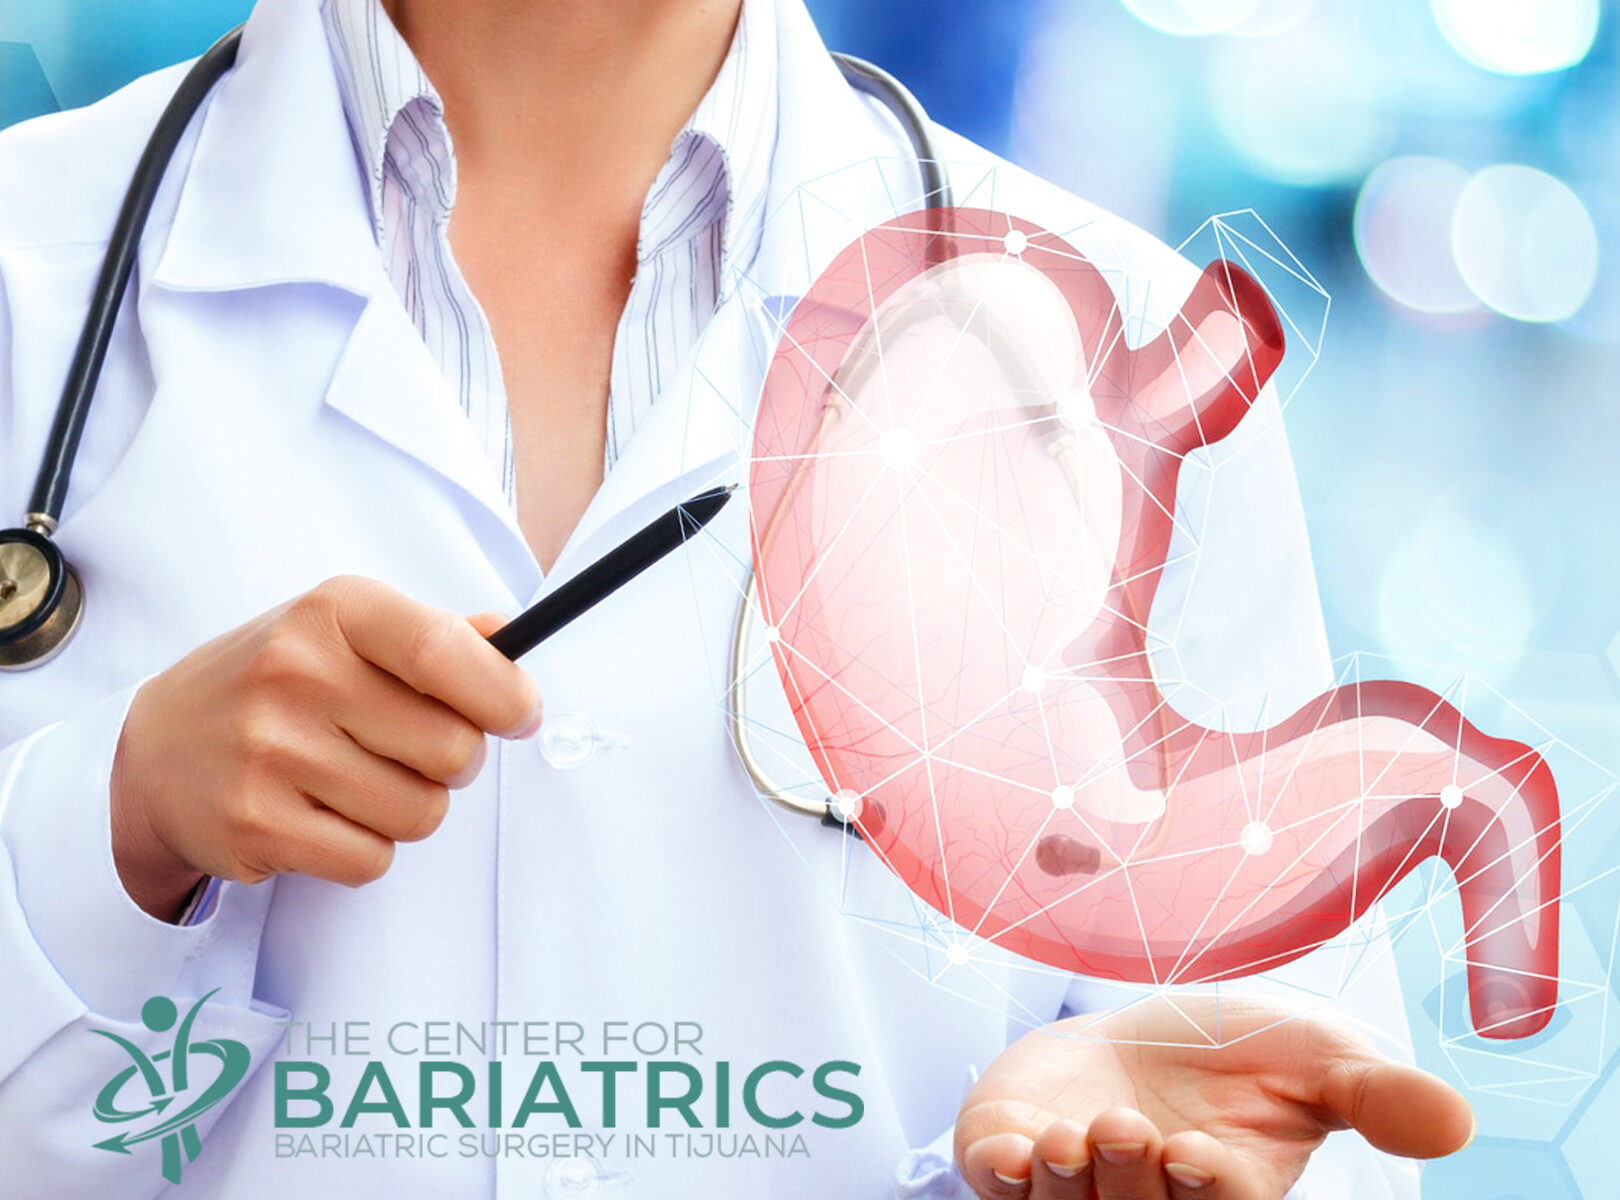 The Center for Bariatrics, is the most comprehensive weight and metabolism management center in all of Mexico, offering bariatric surgery in Tijuana.